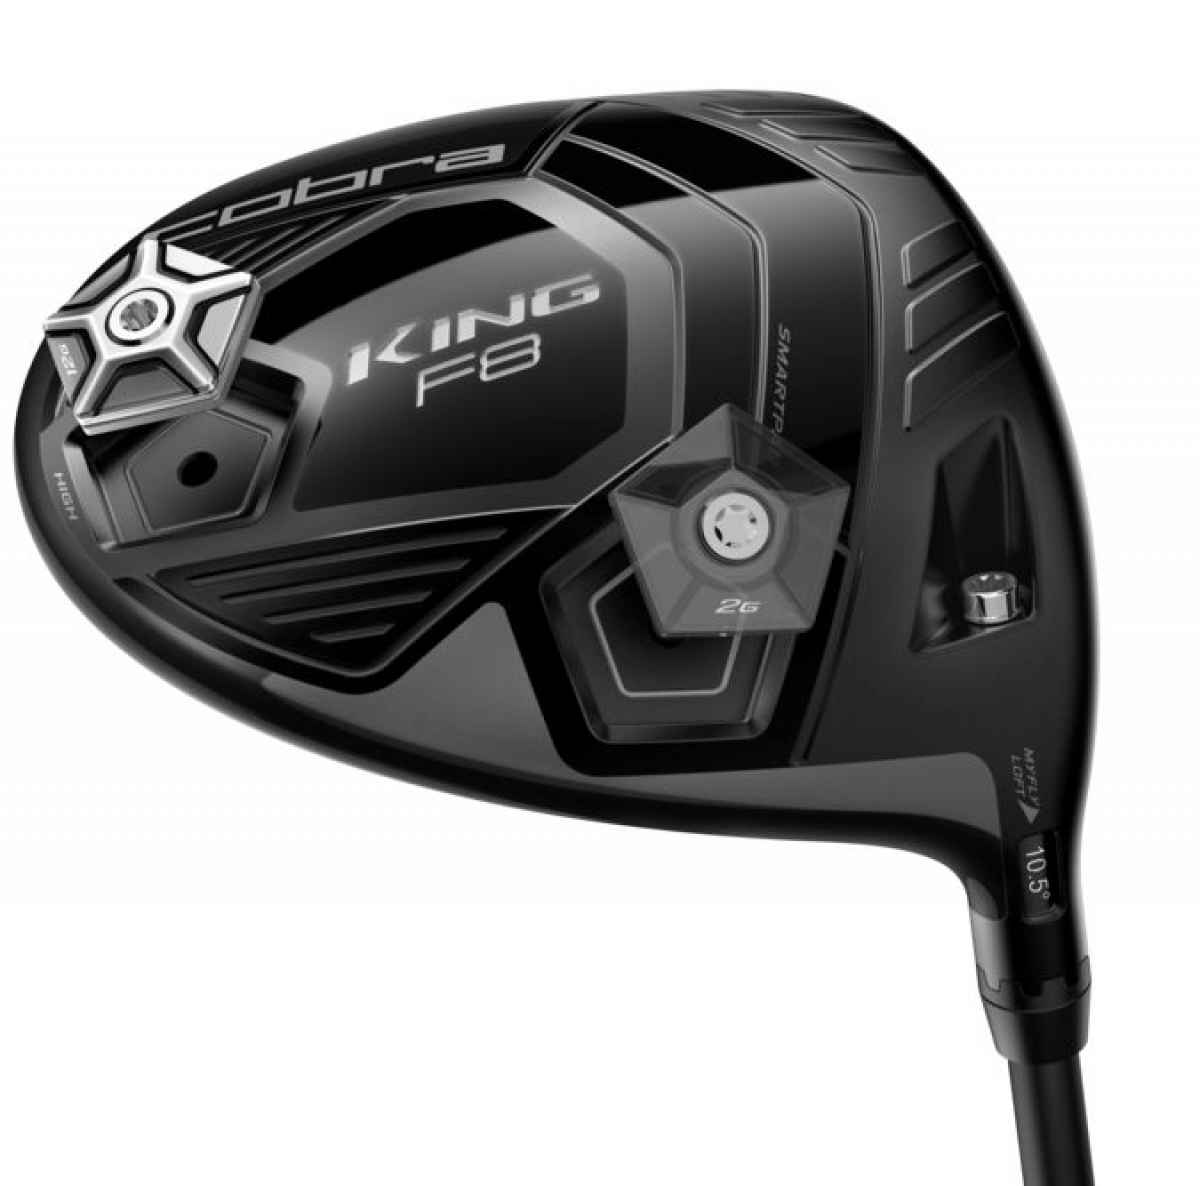 Cobra King F8 Driver Review: High-end performance at a competitive price